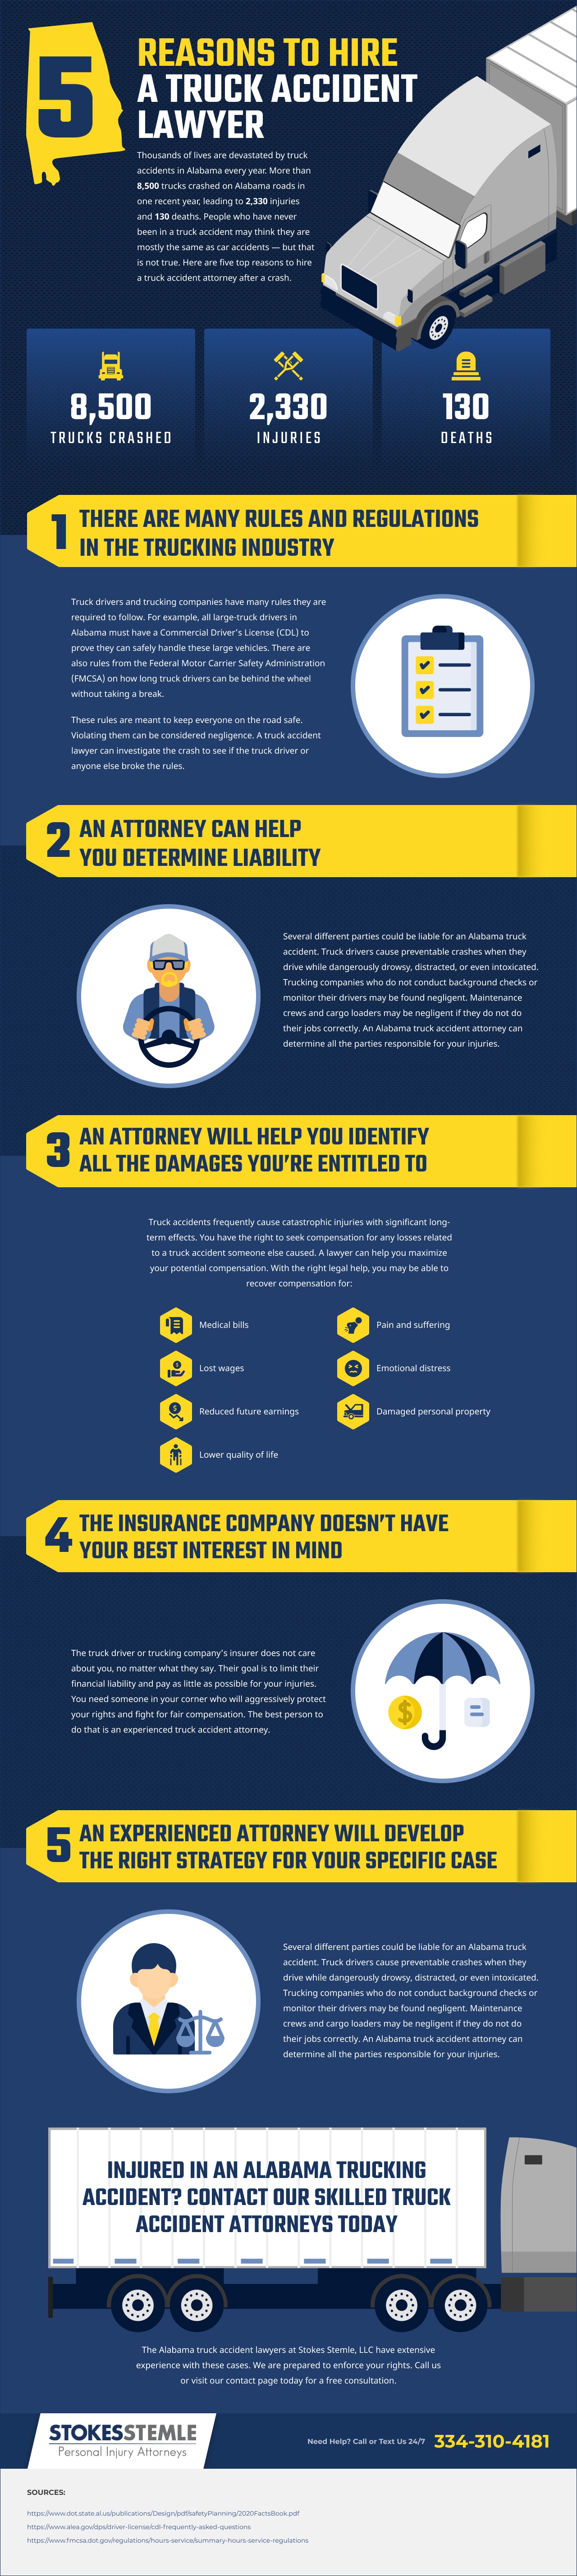 5 Reasons to Hire a Truck Accident Lawyer